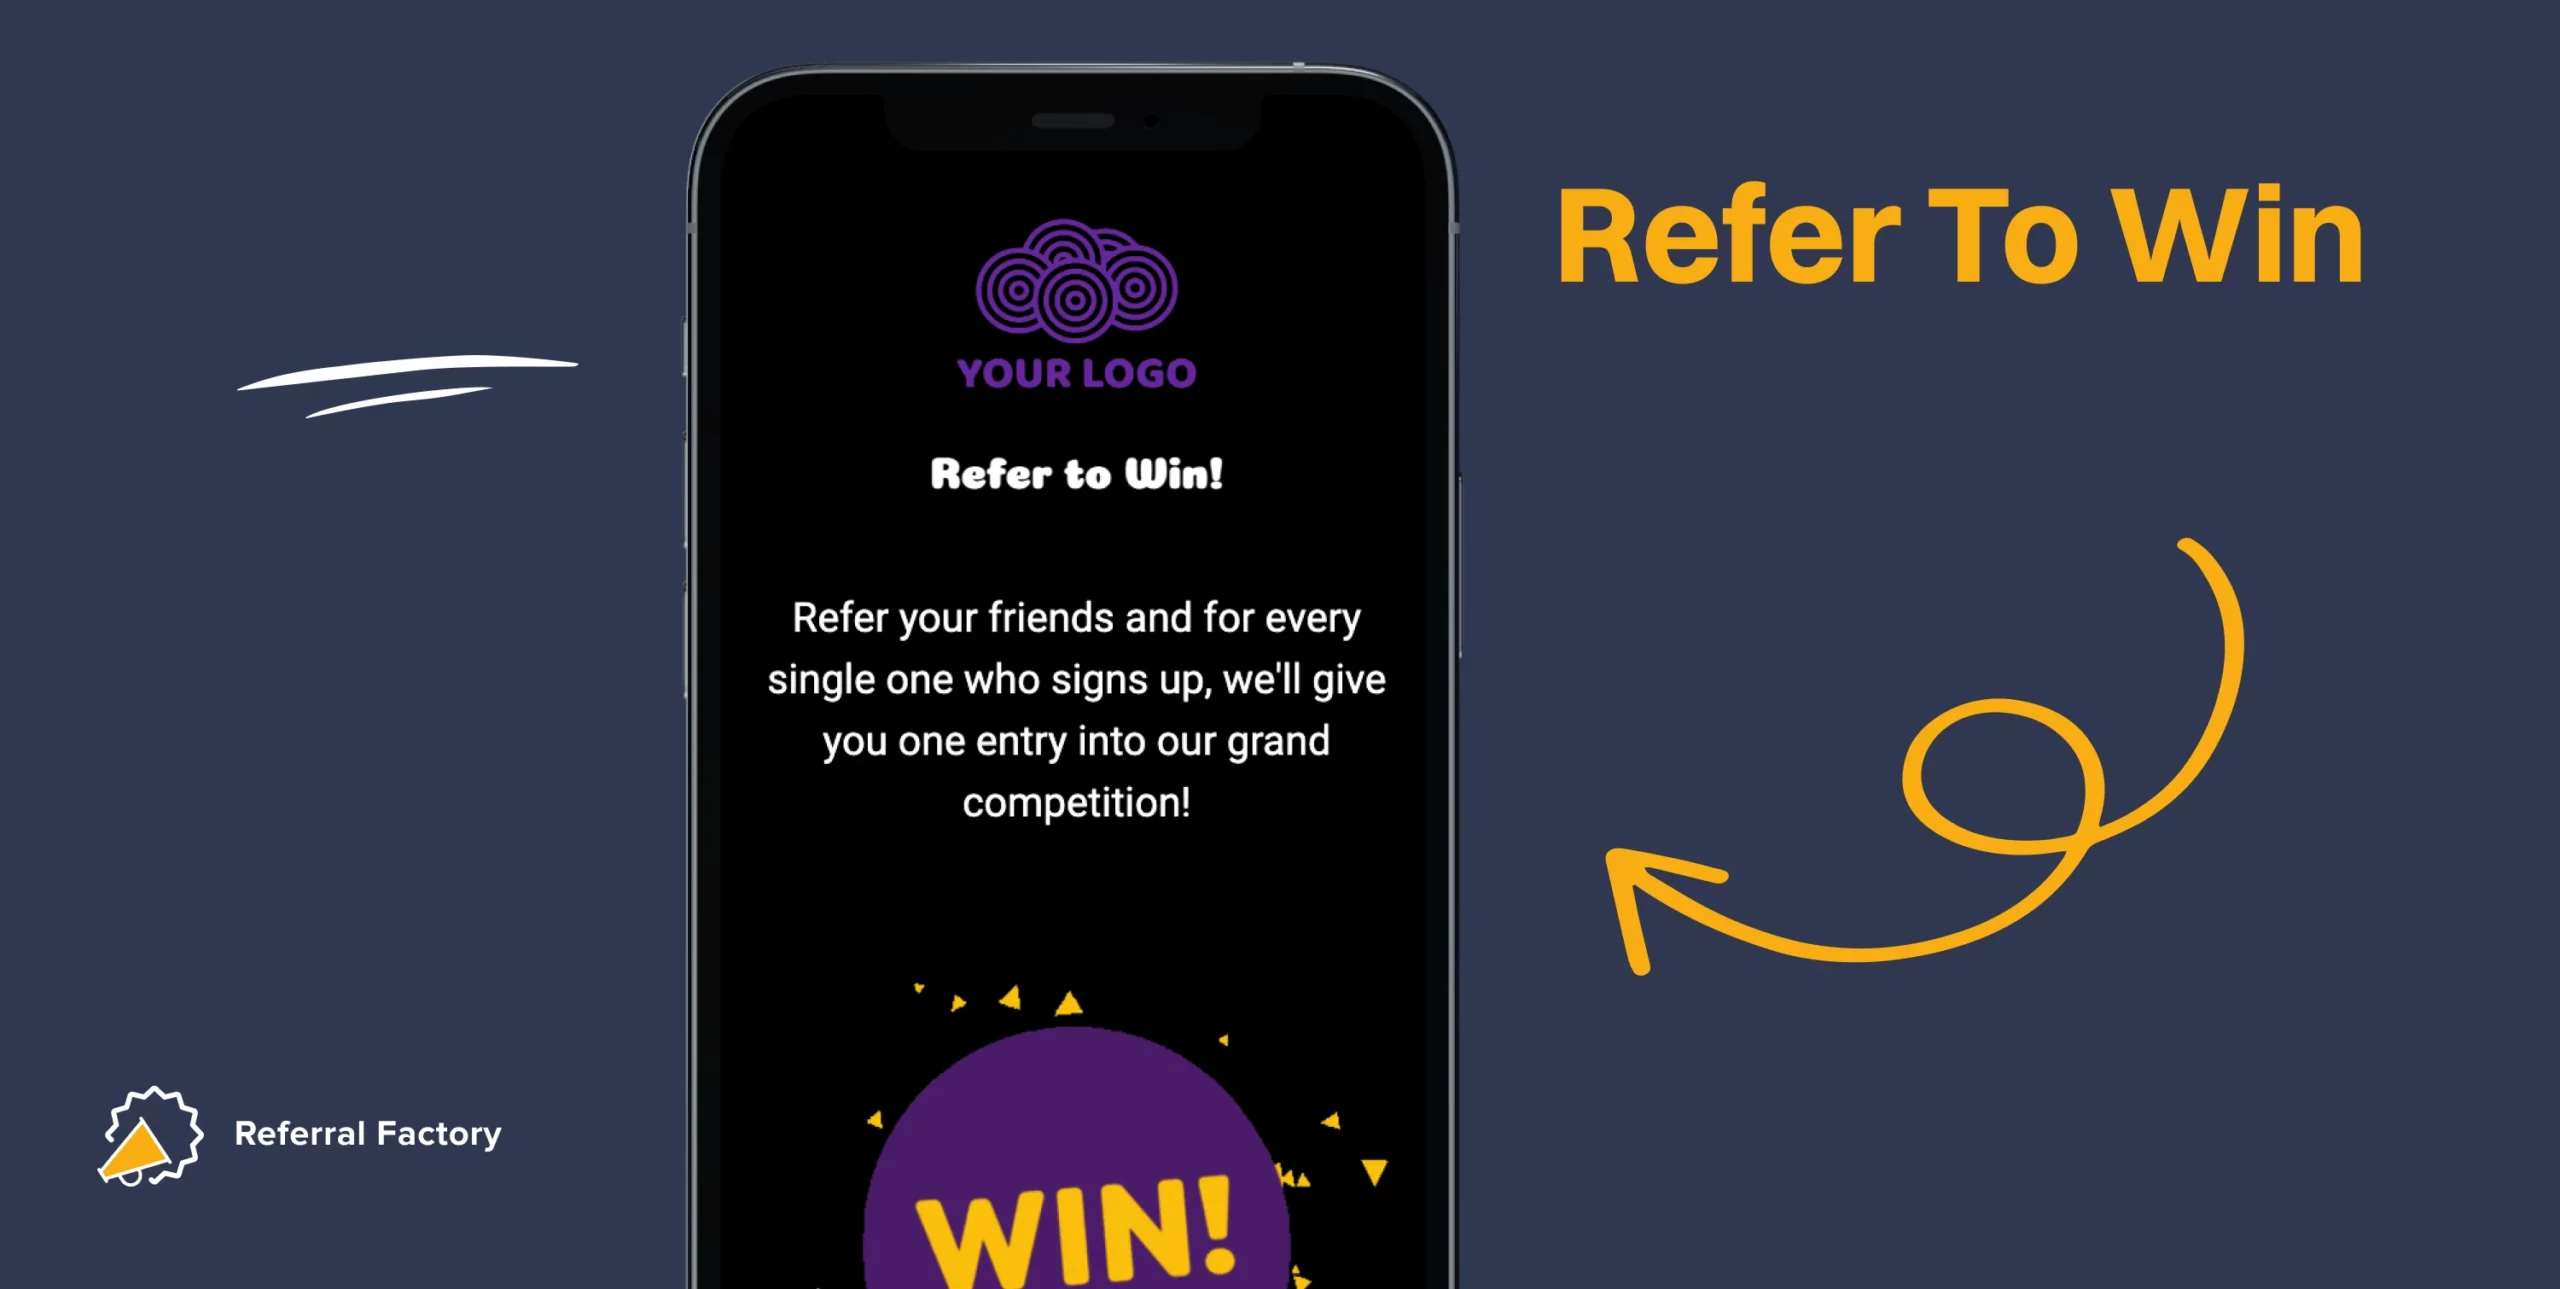 best referral program tools referral program software refer to win competition referral programs referral factory